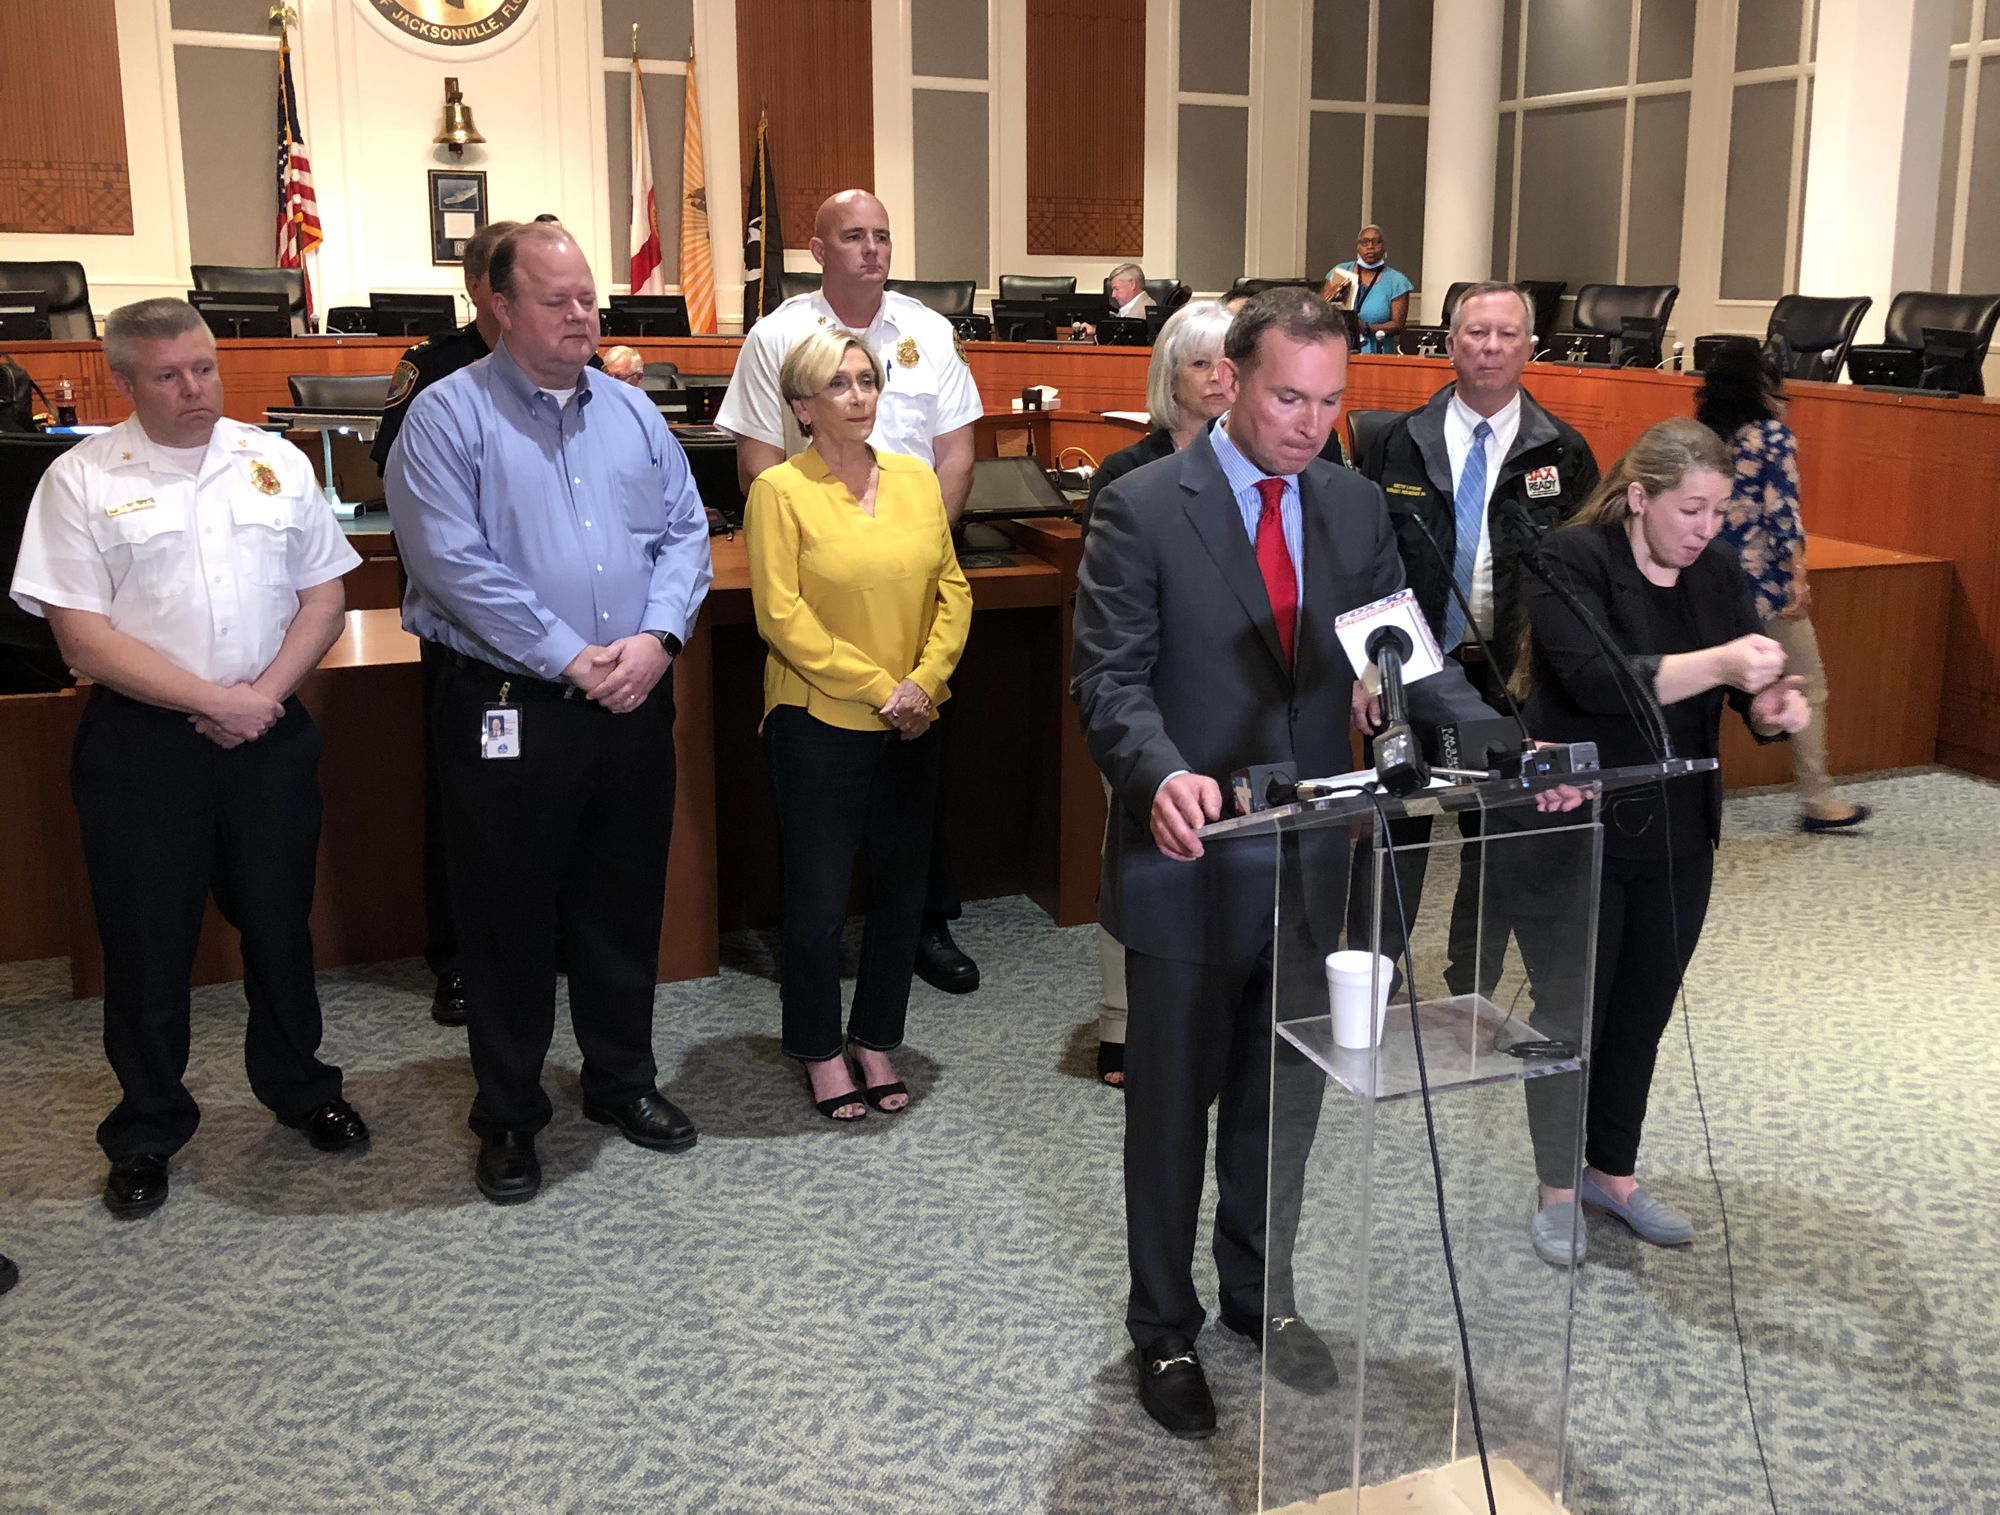 Mayor Lenny Curry limits bars, restaurants, churches, movie theaters and “social gathering places” to a maximum capacity of 50 people on March 16.